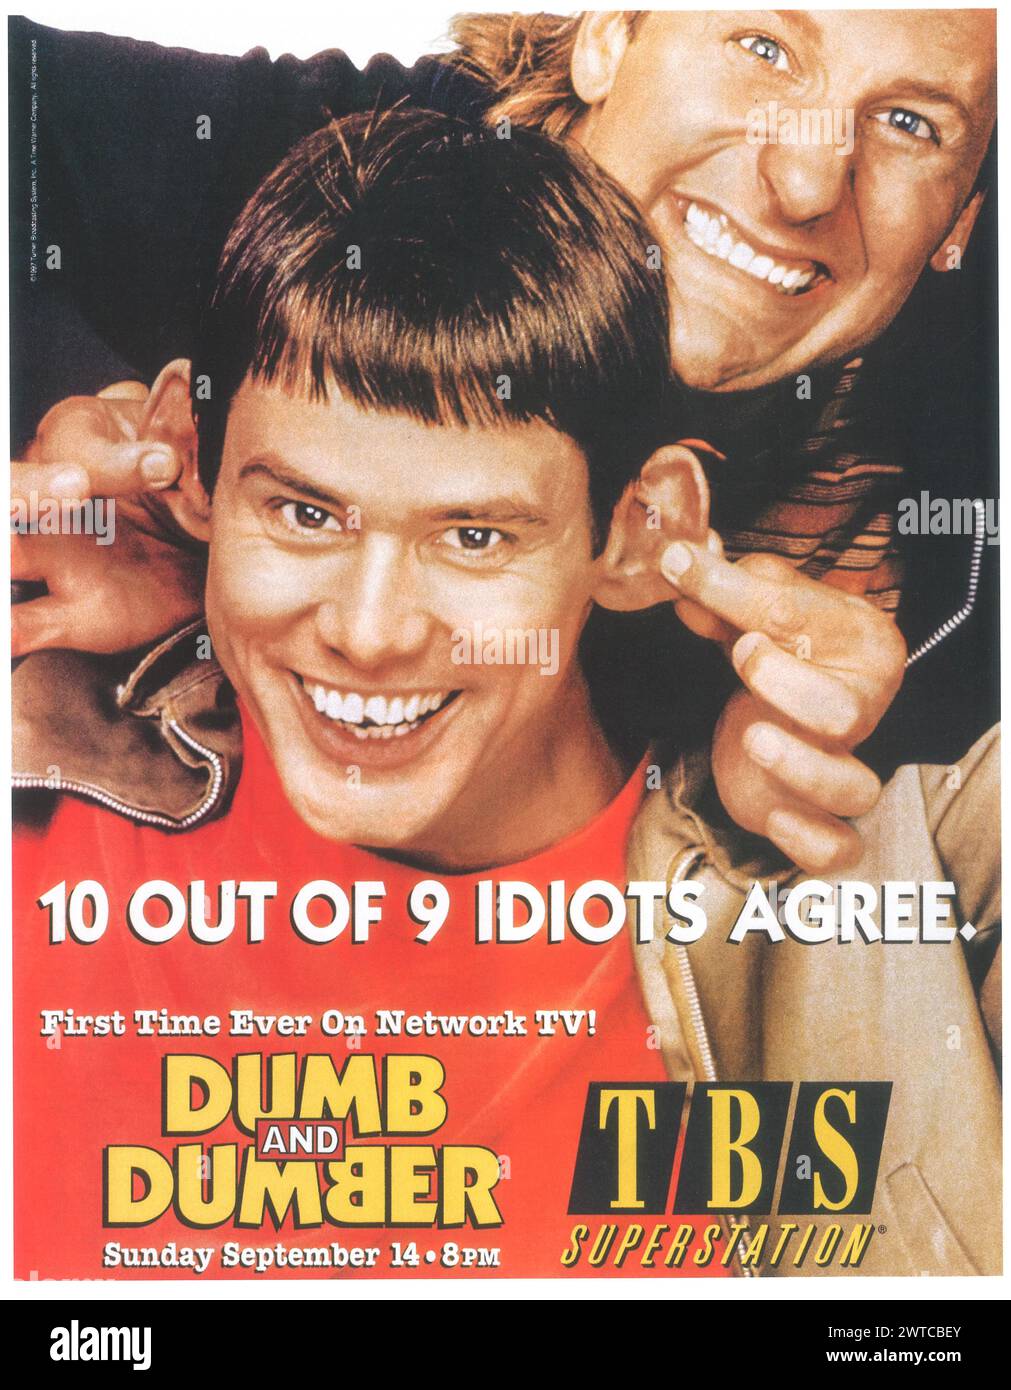 1997 Dumb and Dumber movie on TBS Superstation, Director: Peter Farrelly, with Jim Carrey, Jeff Daniels Stock Photo